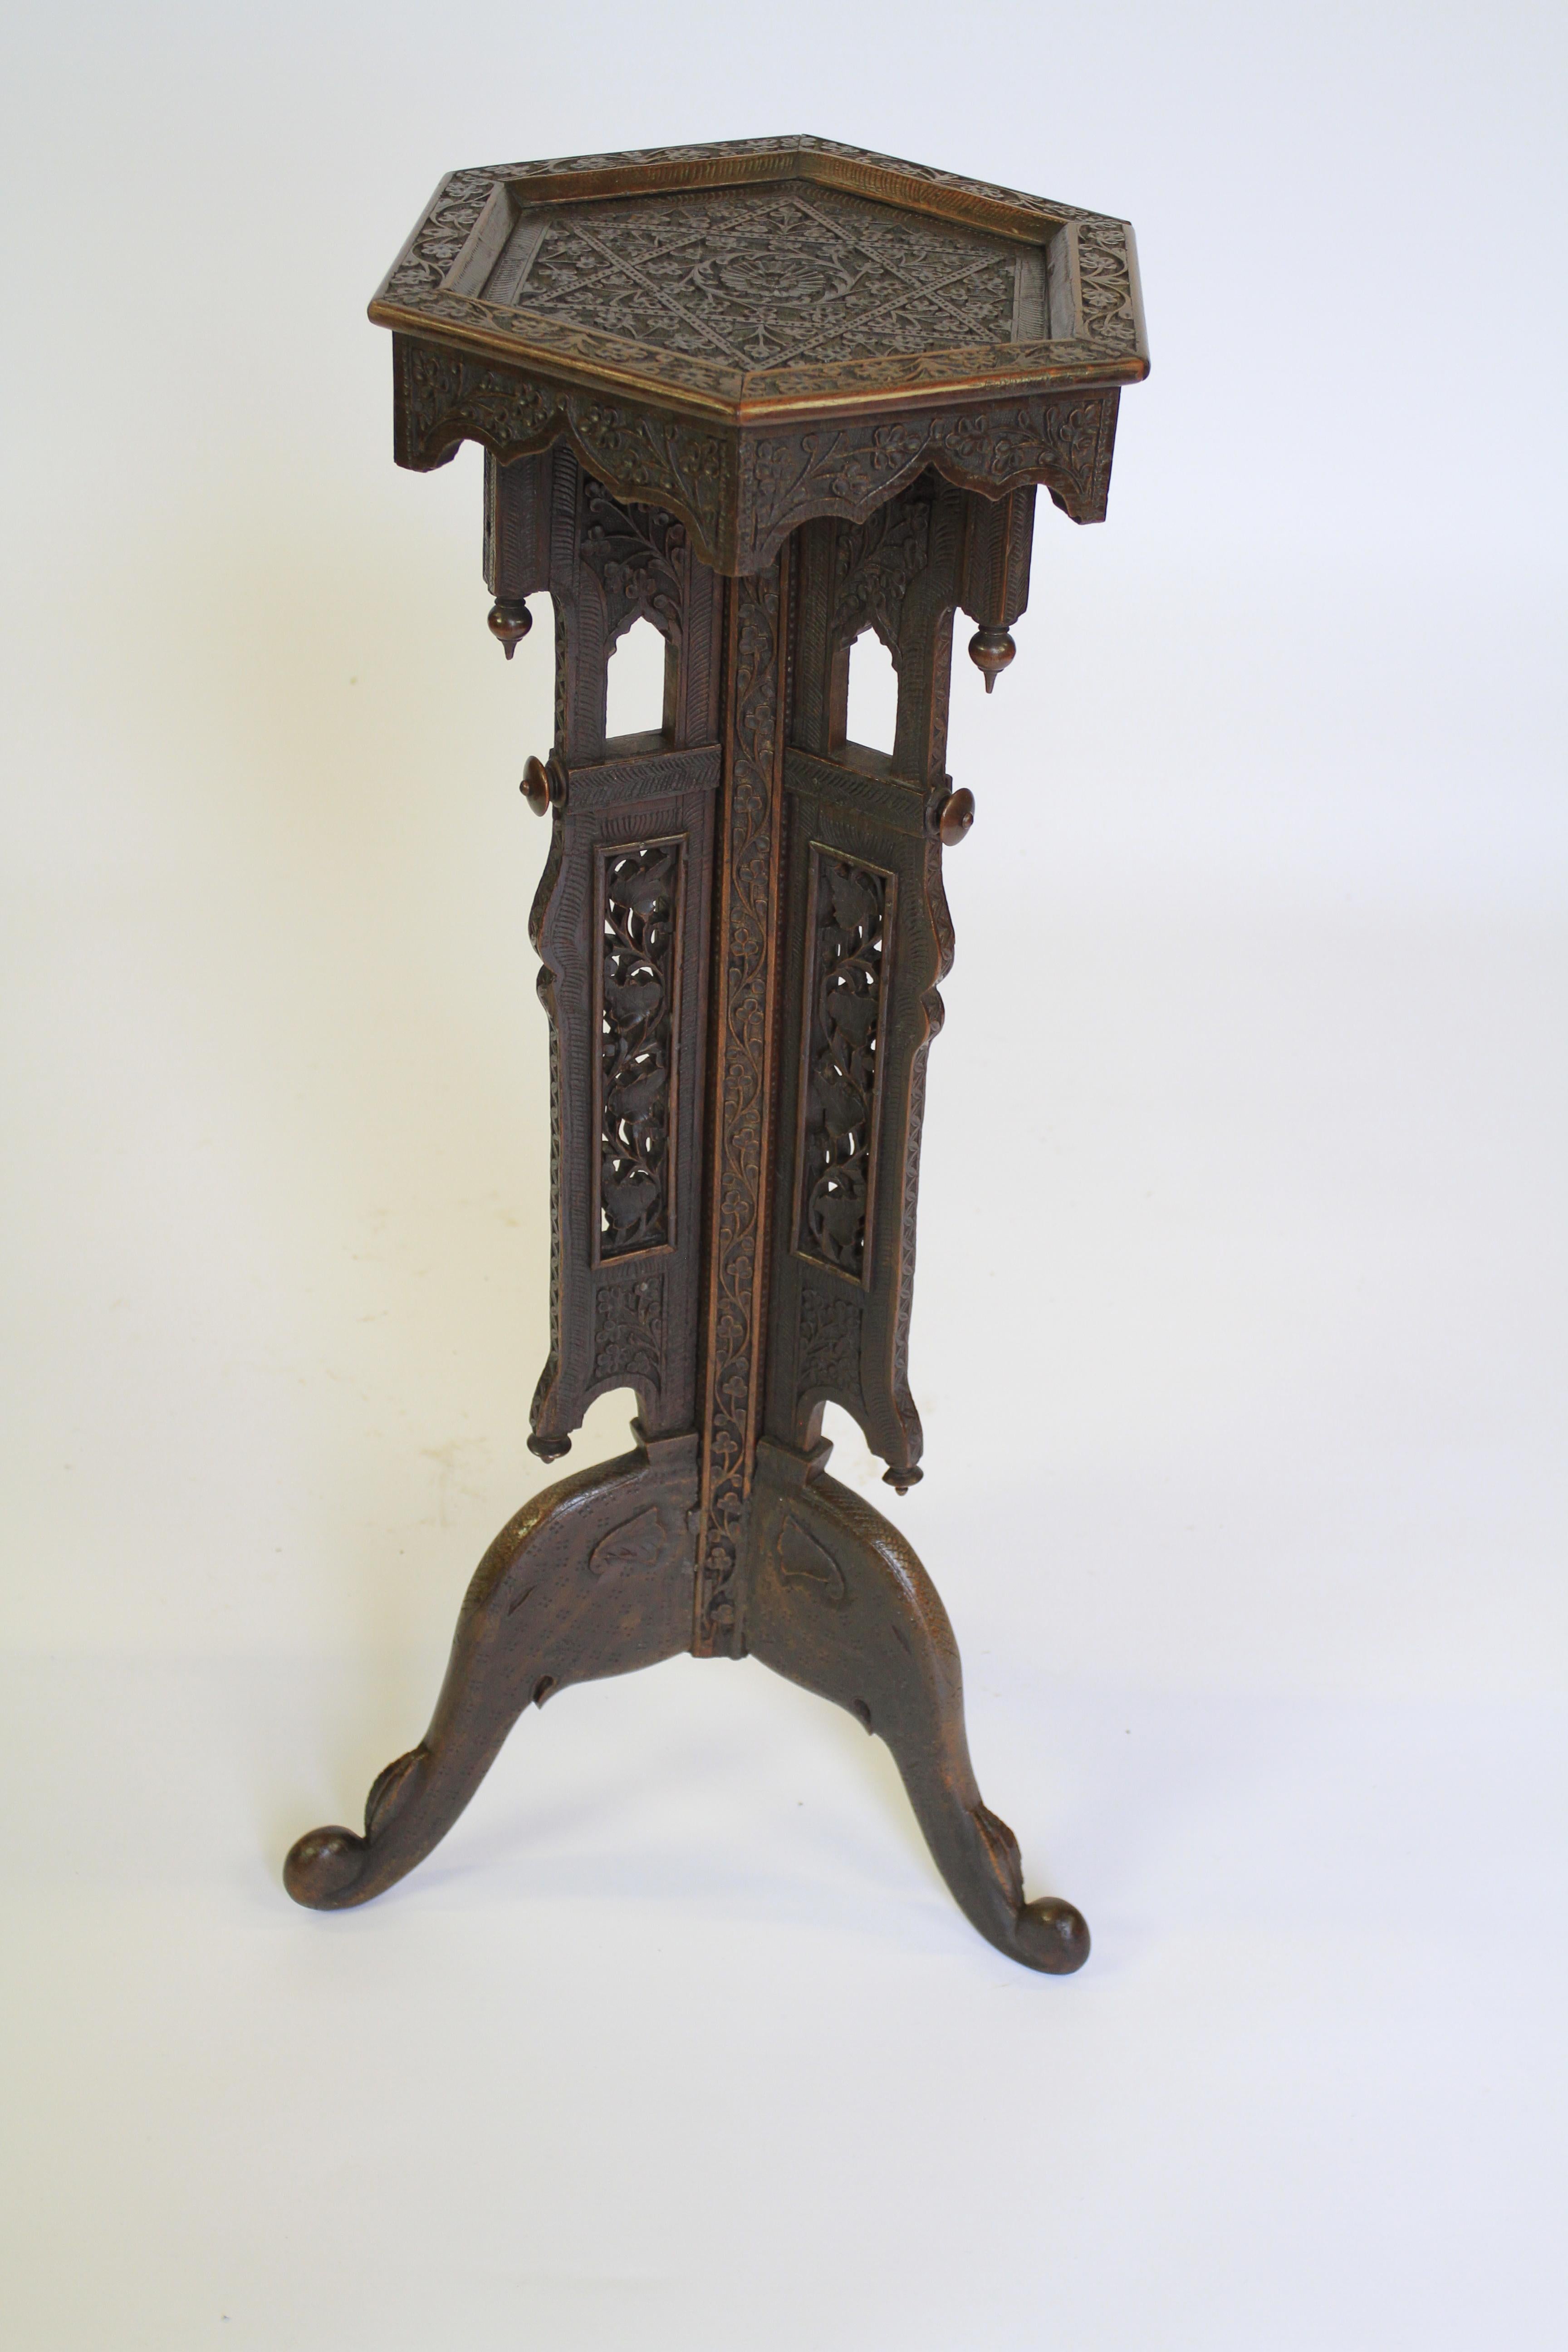 Indian Carved Lamp Table circa 1930s
Hexagonal carved top
Centre pedestal with 3 open pierced carved Panels
Sitting on Tripod Elephant Head shaped Legs
Good quality carving